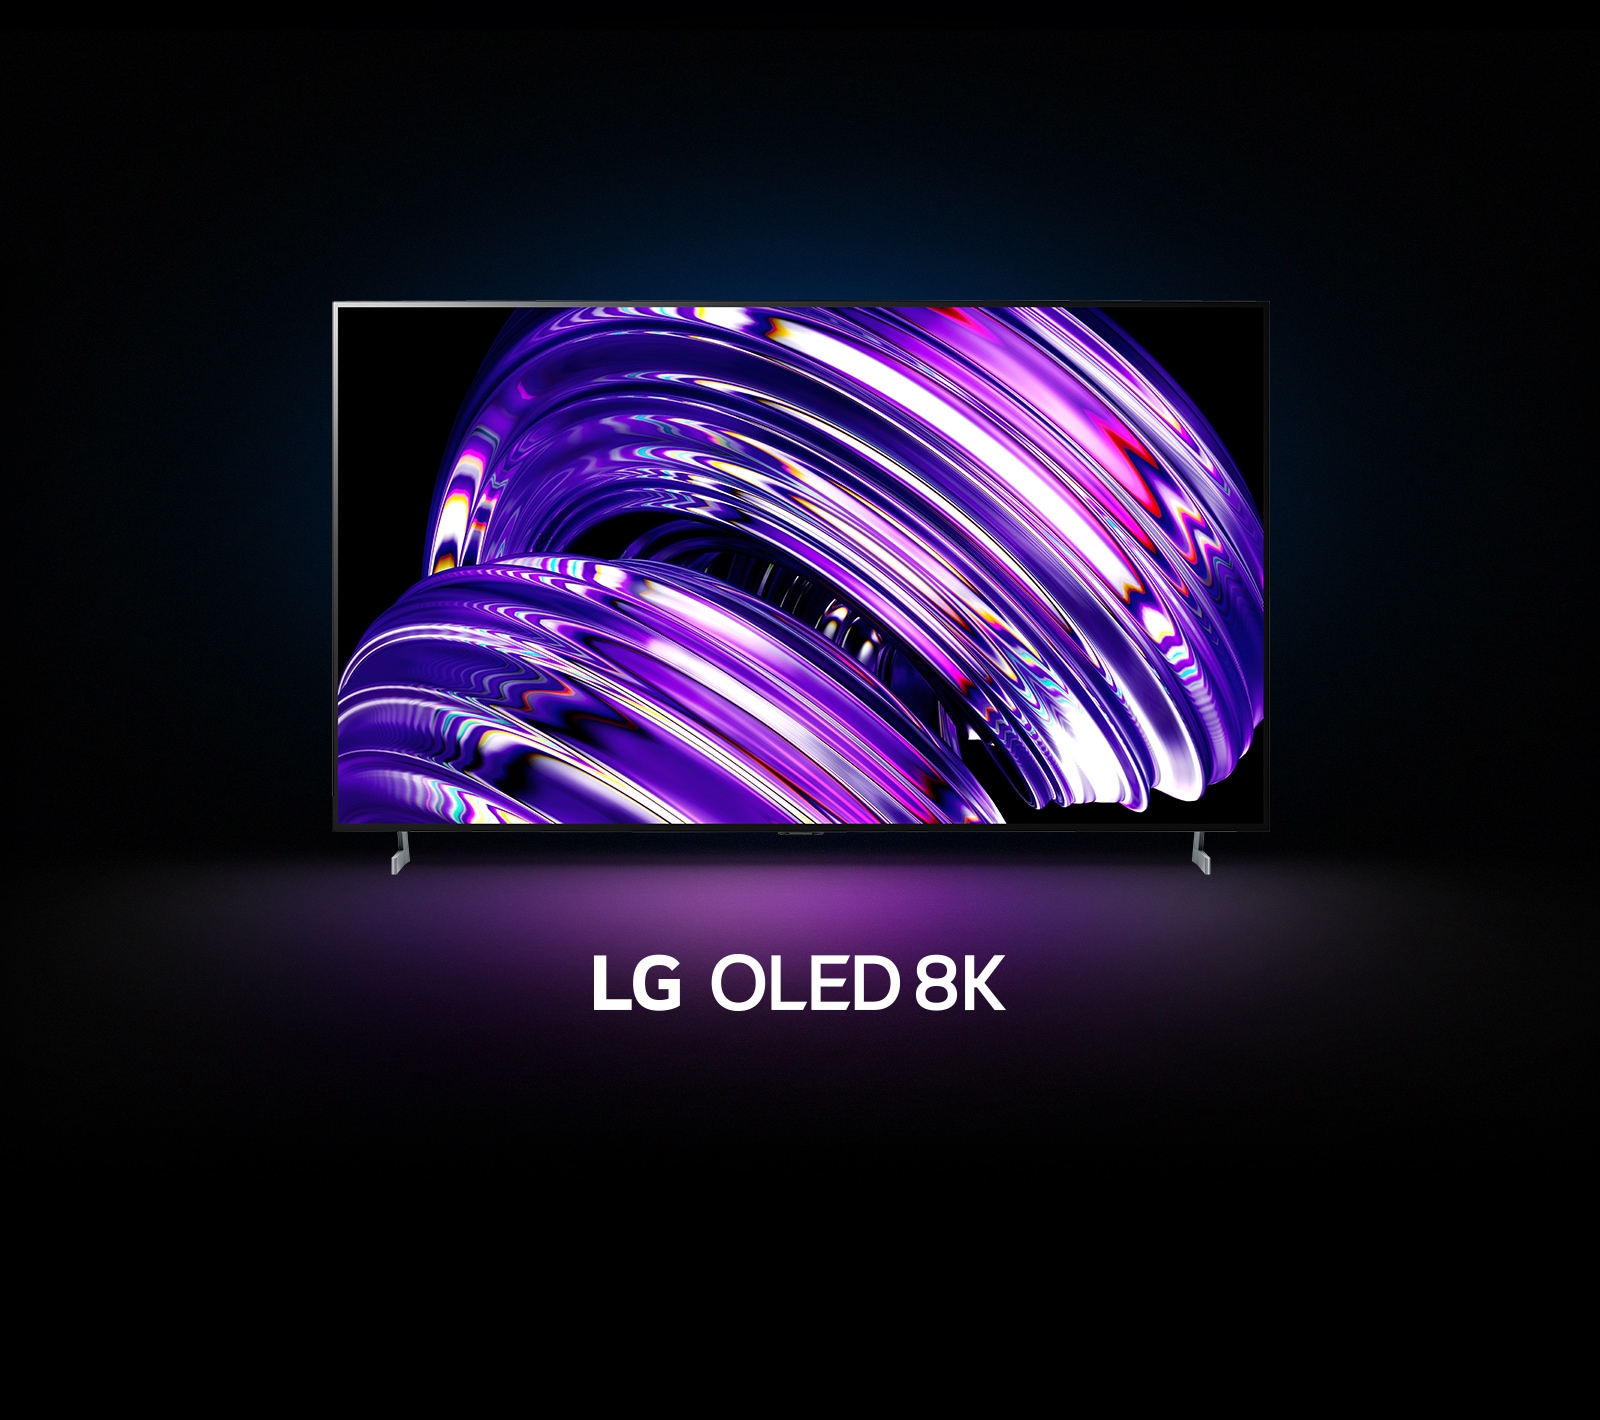 The One. The Only. The OLED 8K.